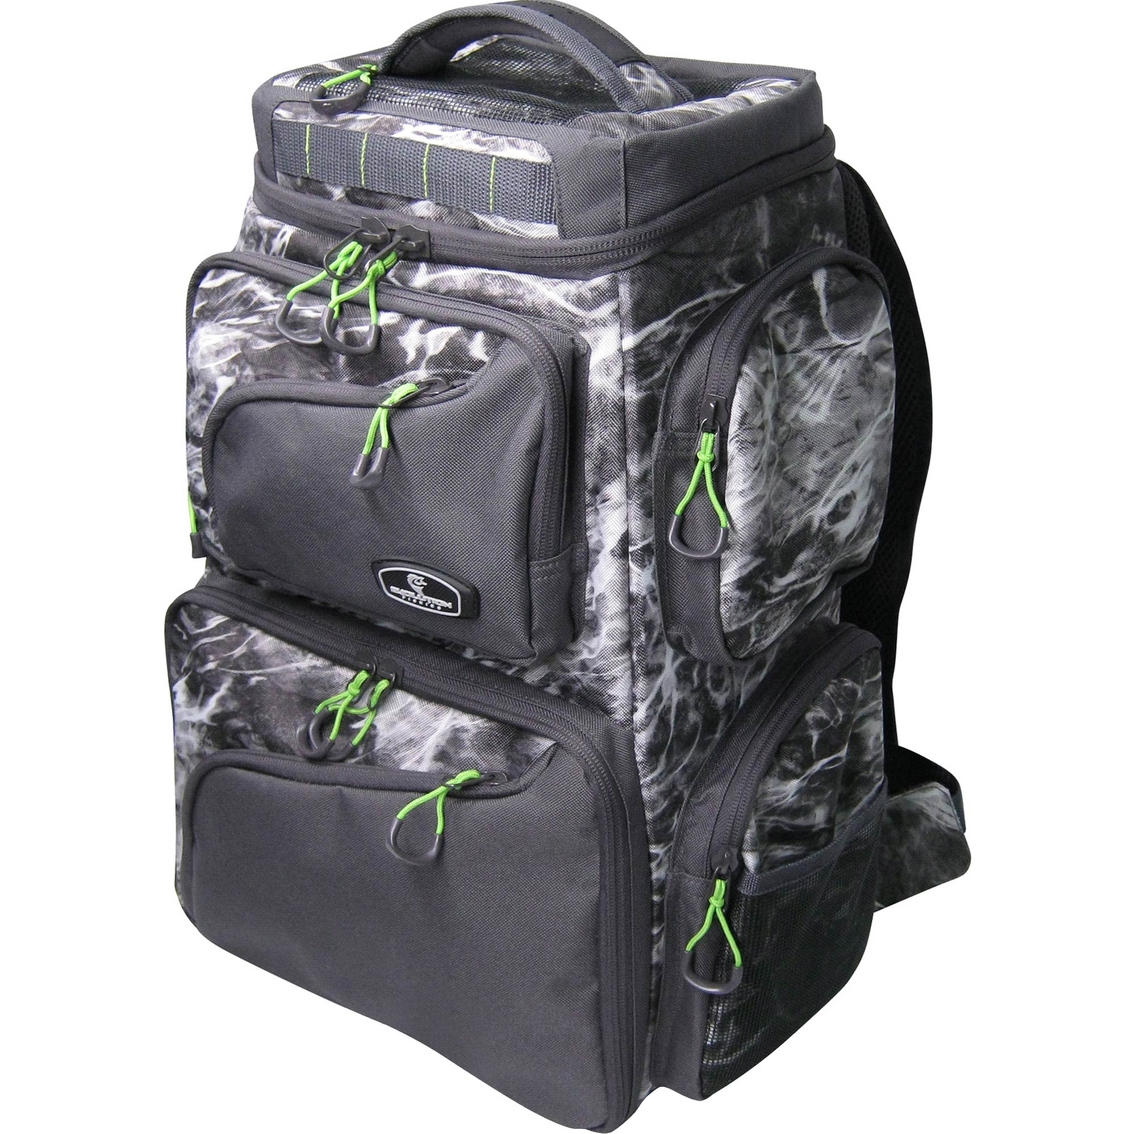 Evolution Outdoors Largemouth 3600 Backpack - Image 3 of 6